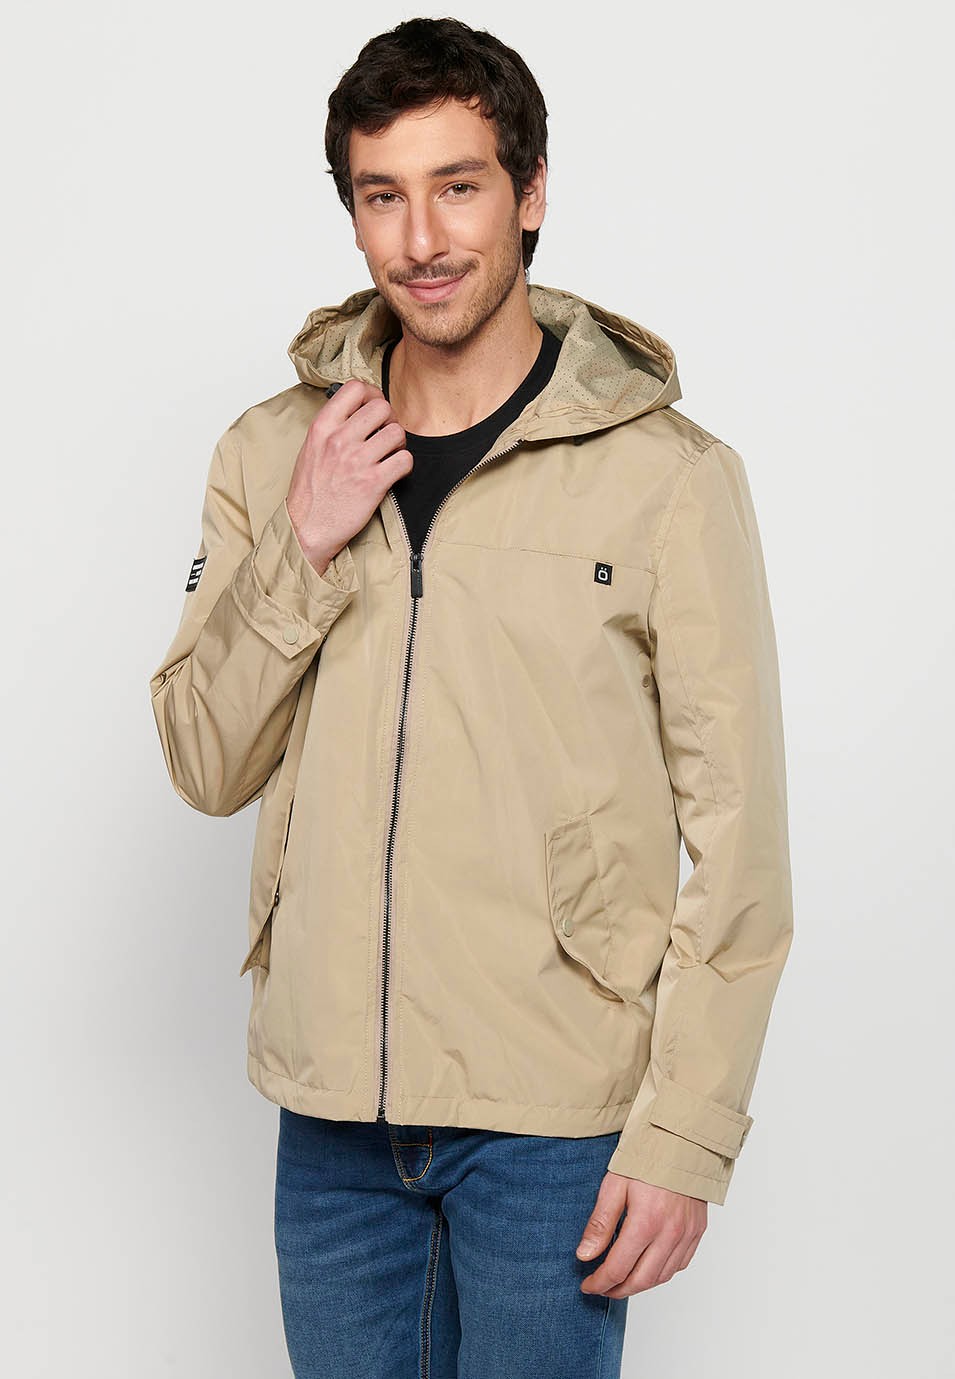 Water Repellent Jacket with Hooded Collar and Front Zipper Closure, Beige Pockets for Men 5